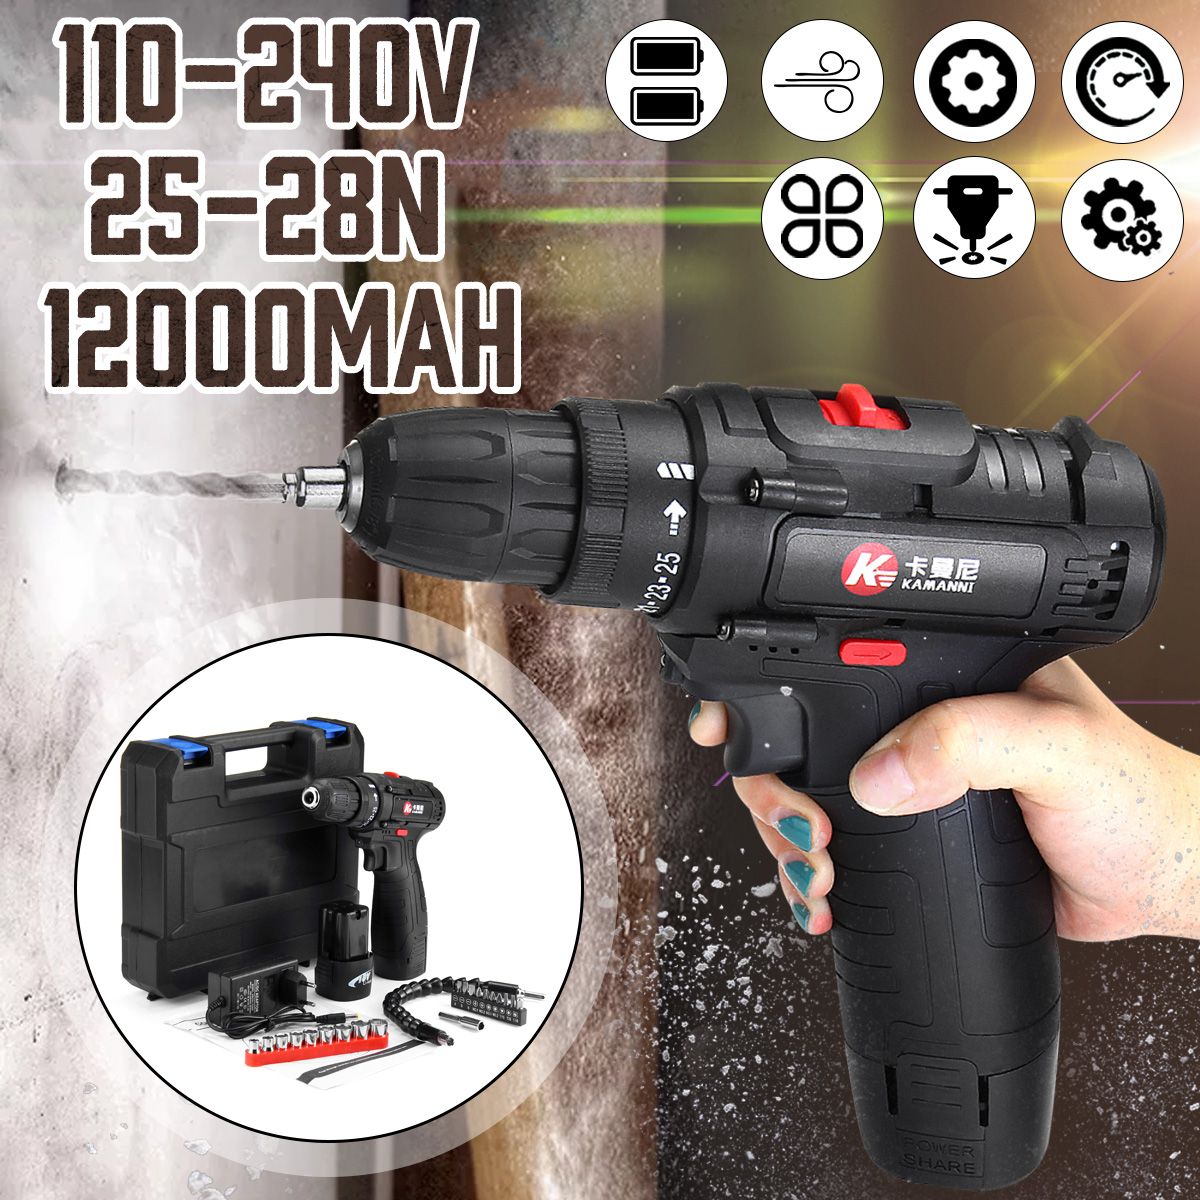 1218V-Universal-Cordless-Electric-Drill-Rechargeable-Hand-Drill-2-Lithium-Battery-With-Accessories-C-1532733